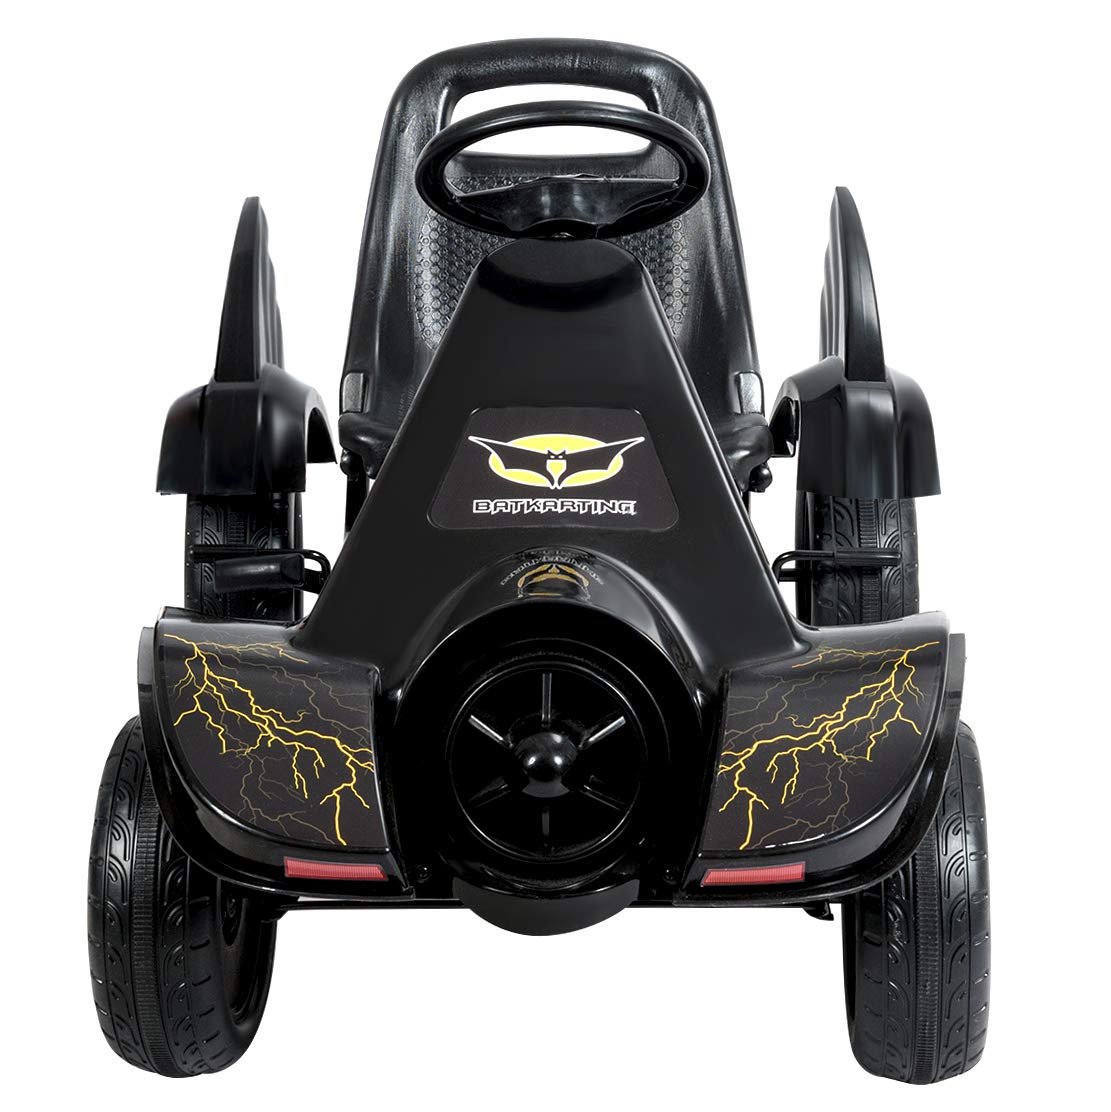 Costzon Kids Pedal Go Kart, Pedal Powered Ride on Car Toy – costzon